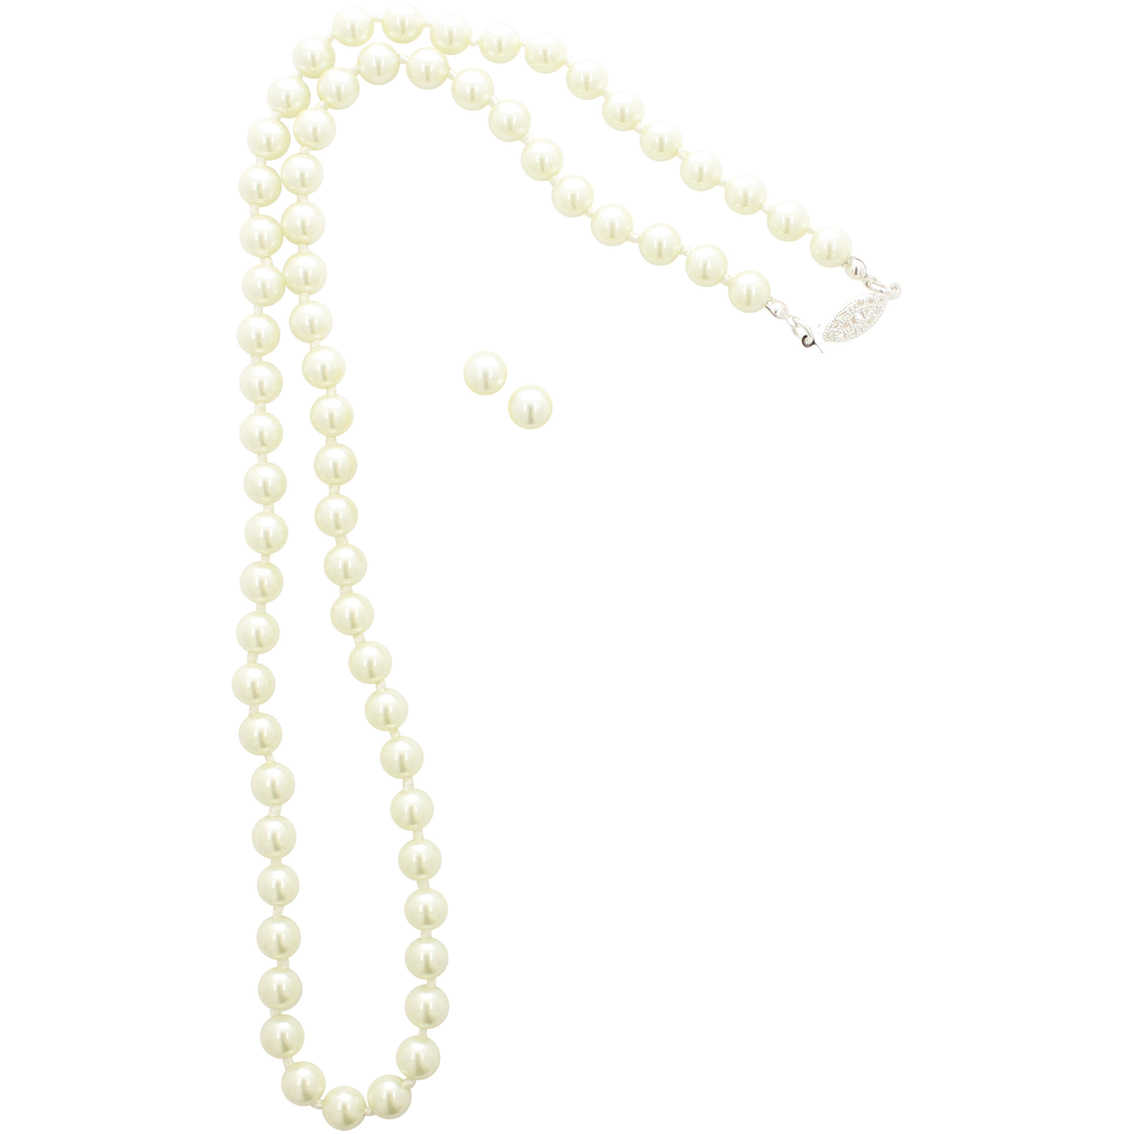 Cherish Faux Pearl Long Necklace and Earring Set - Image 2 of 2